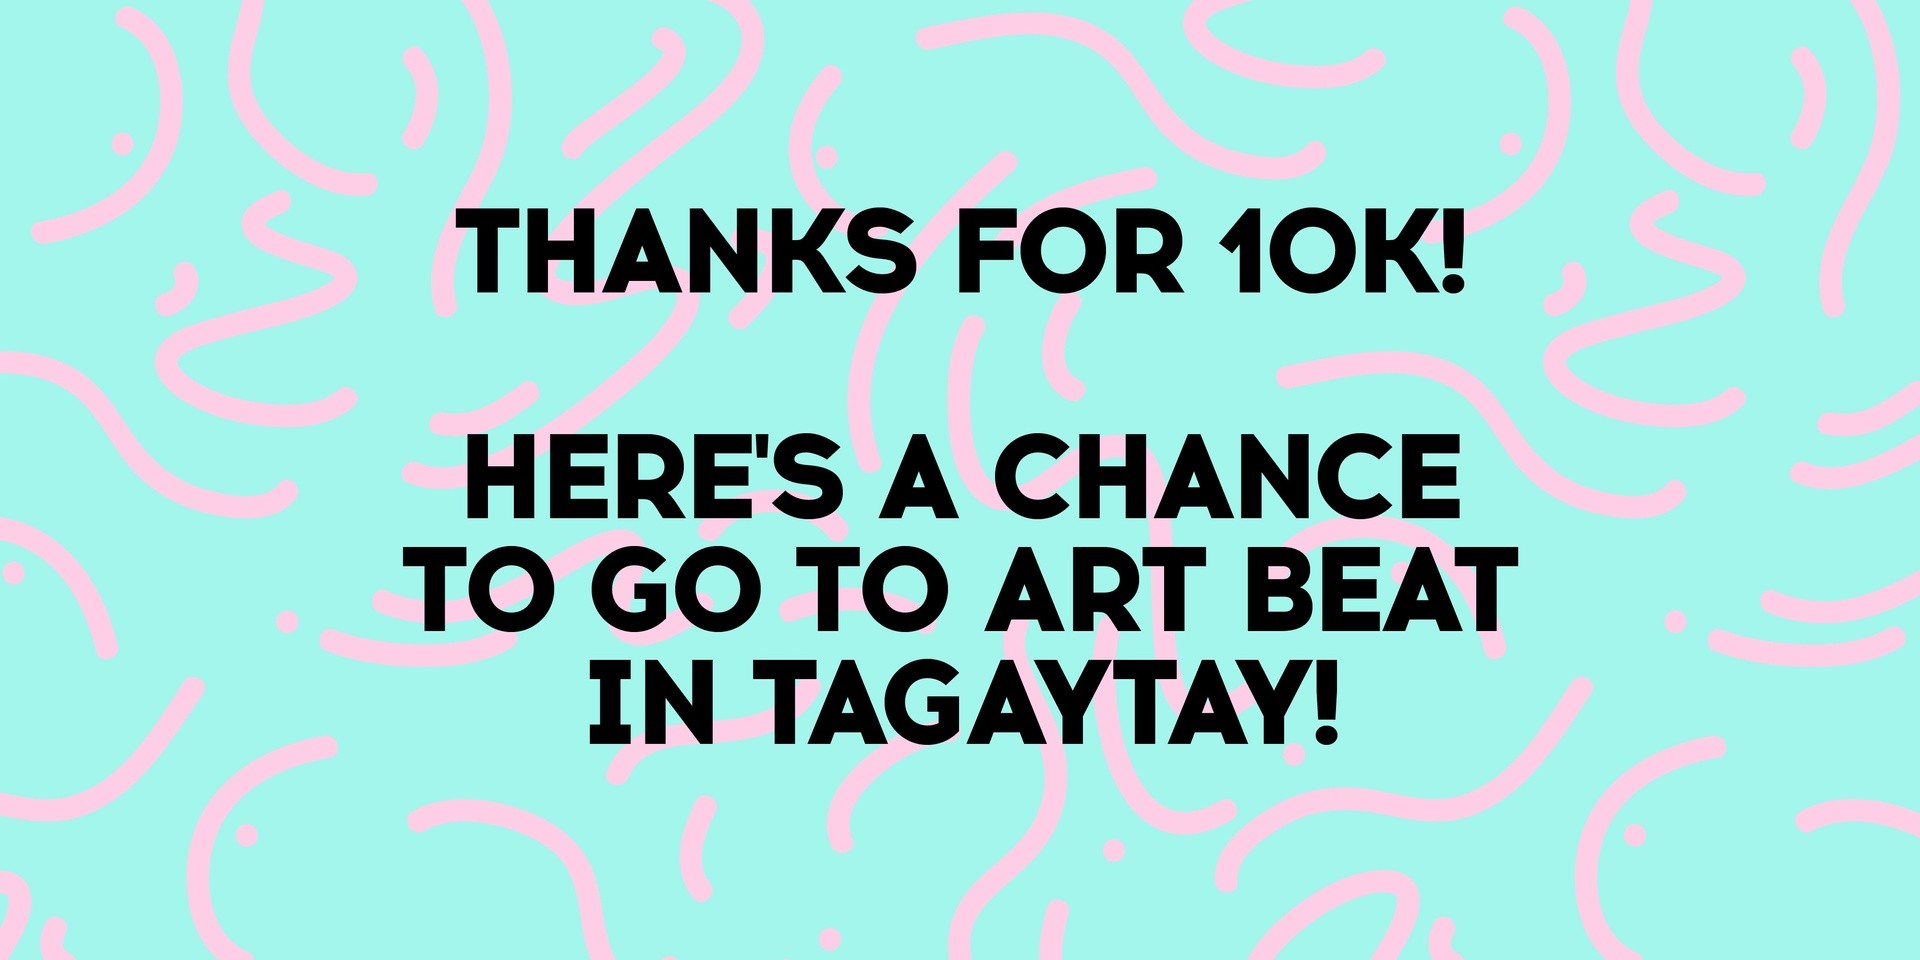 CONTEST: Thanks for 10K! Here's a chance to win tickets to Tagaytay Art Beat 2!